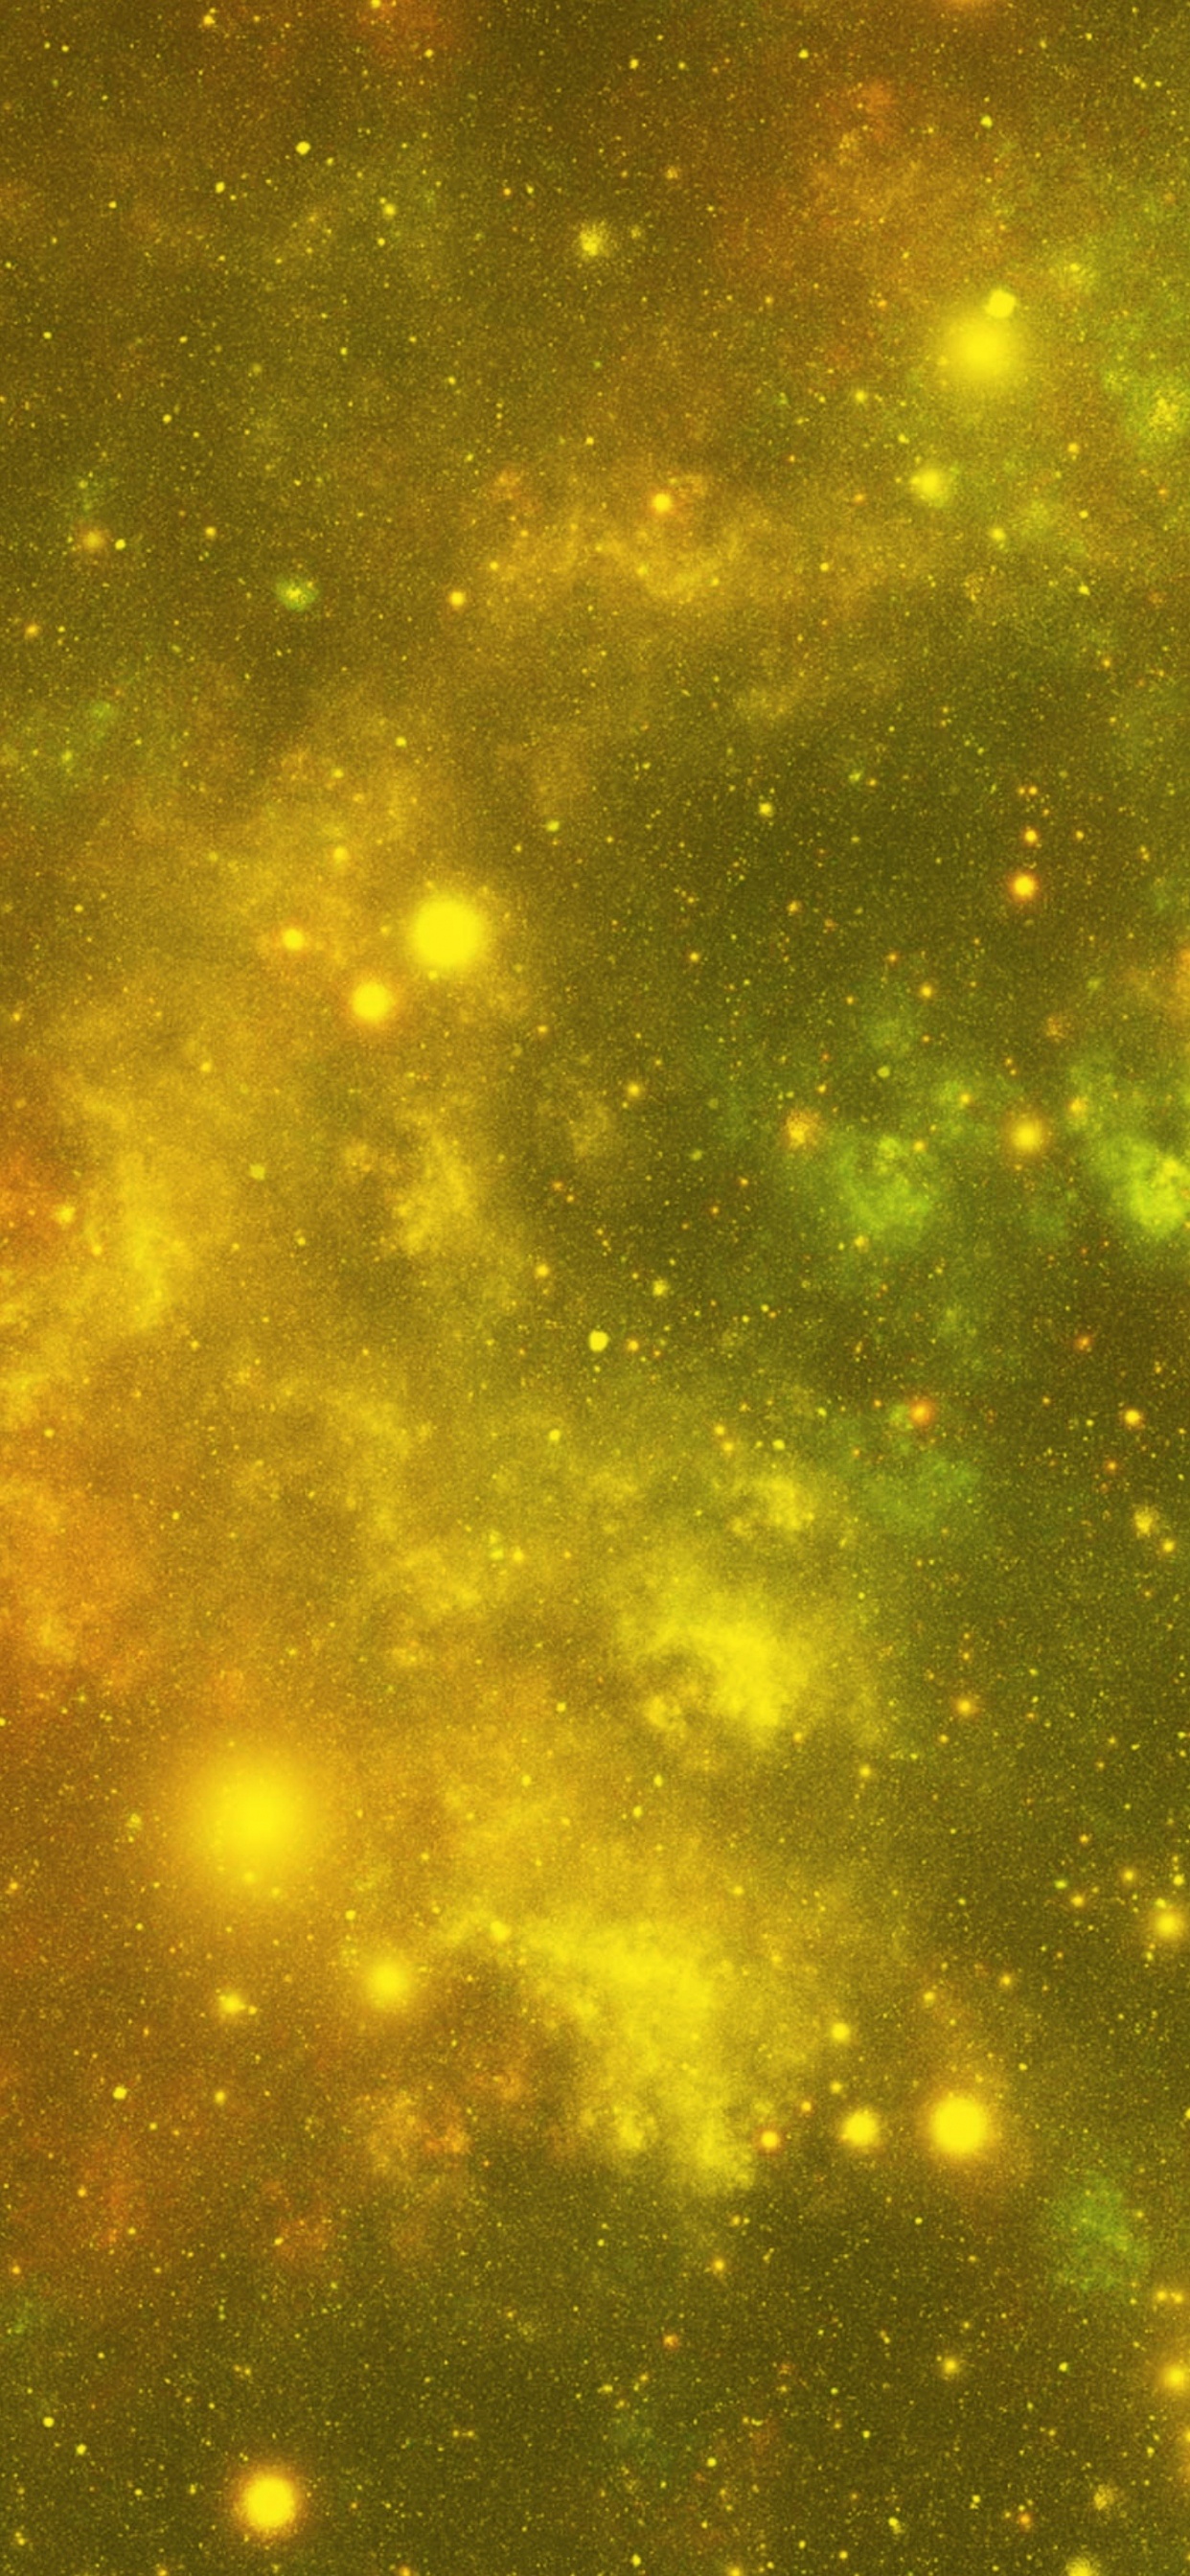 Green and Yellow Stars in The Sky. Wallpaper in 1242x2688 Resolution